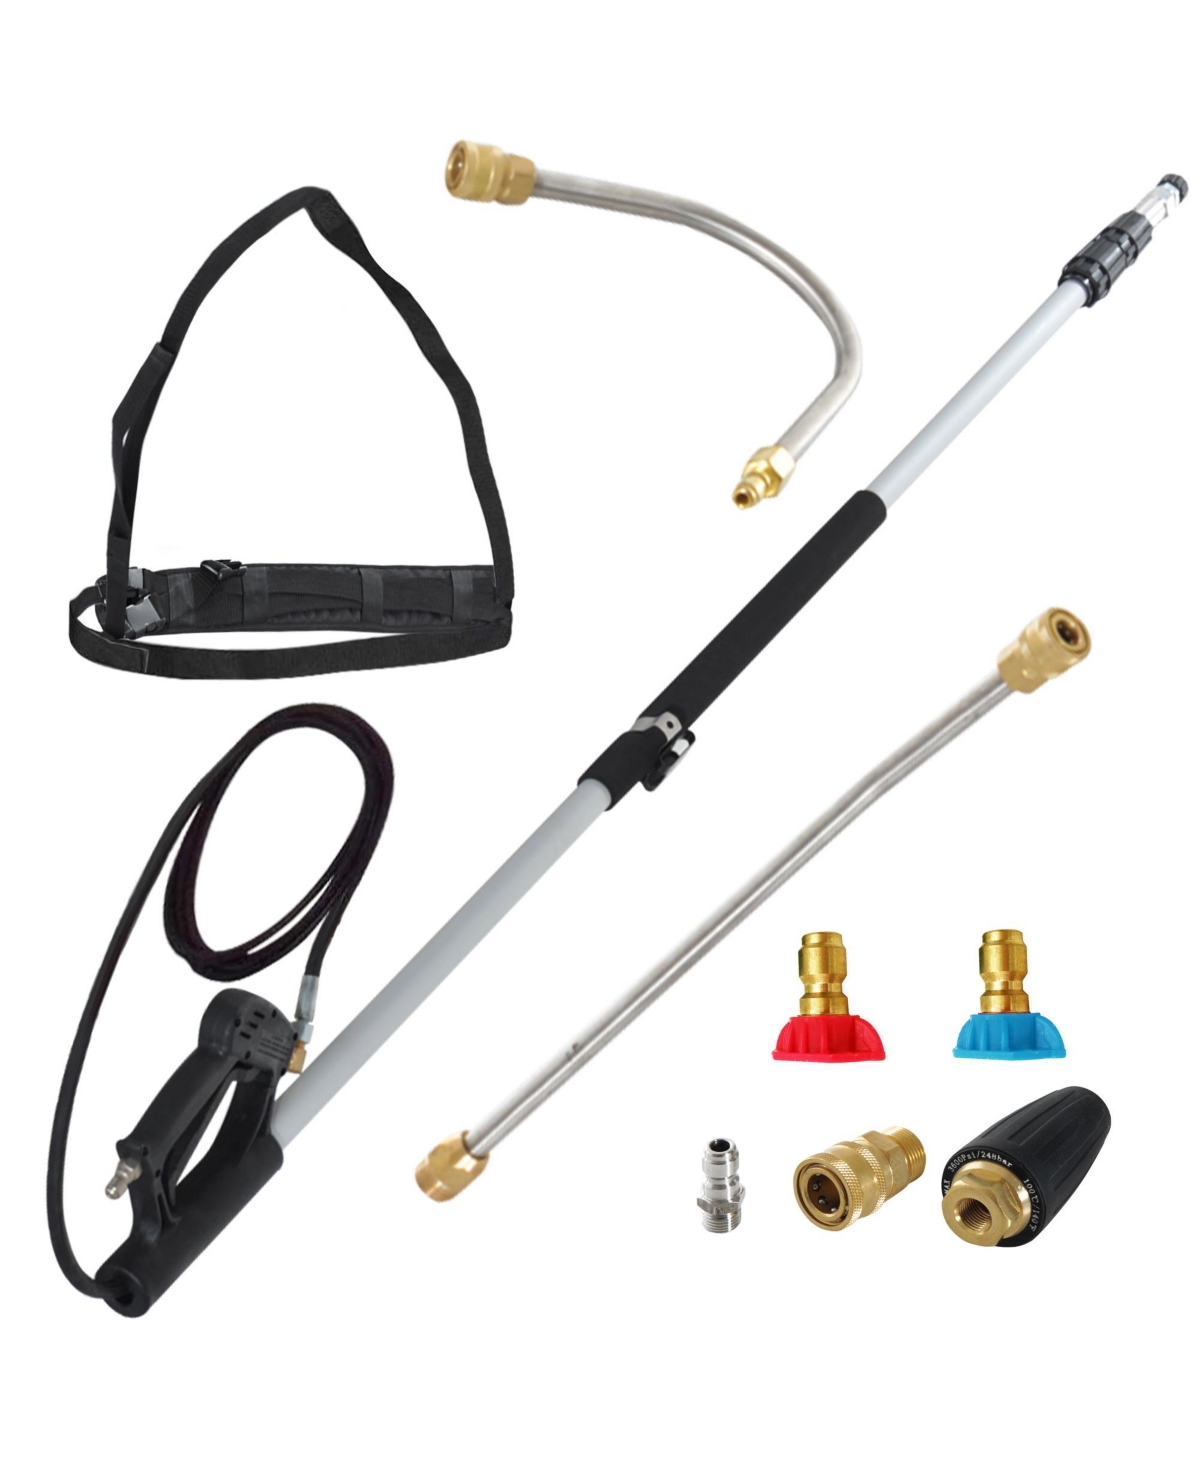 18' High Pressure Power Washer Telescoping Lance Extension Wand with 3/8 Inch Quick Connection, 2 Spray Nozzle Tips, 2 Wand Pivoting Couplers